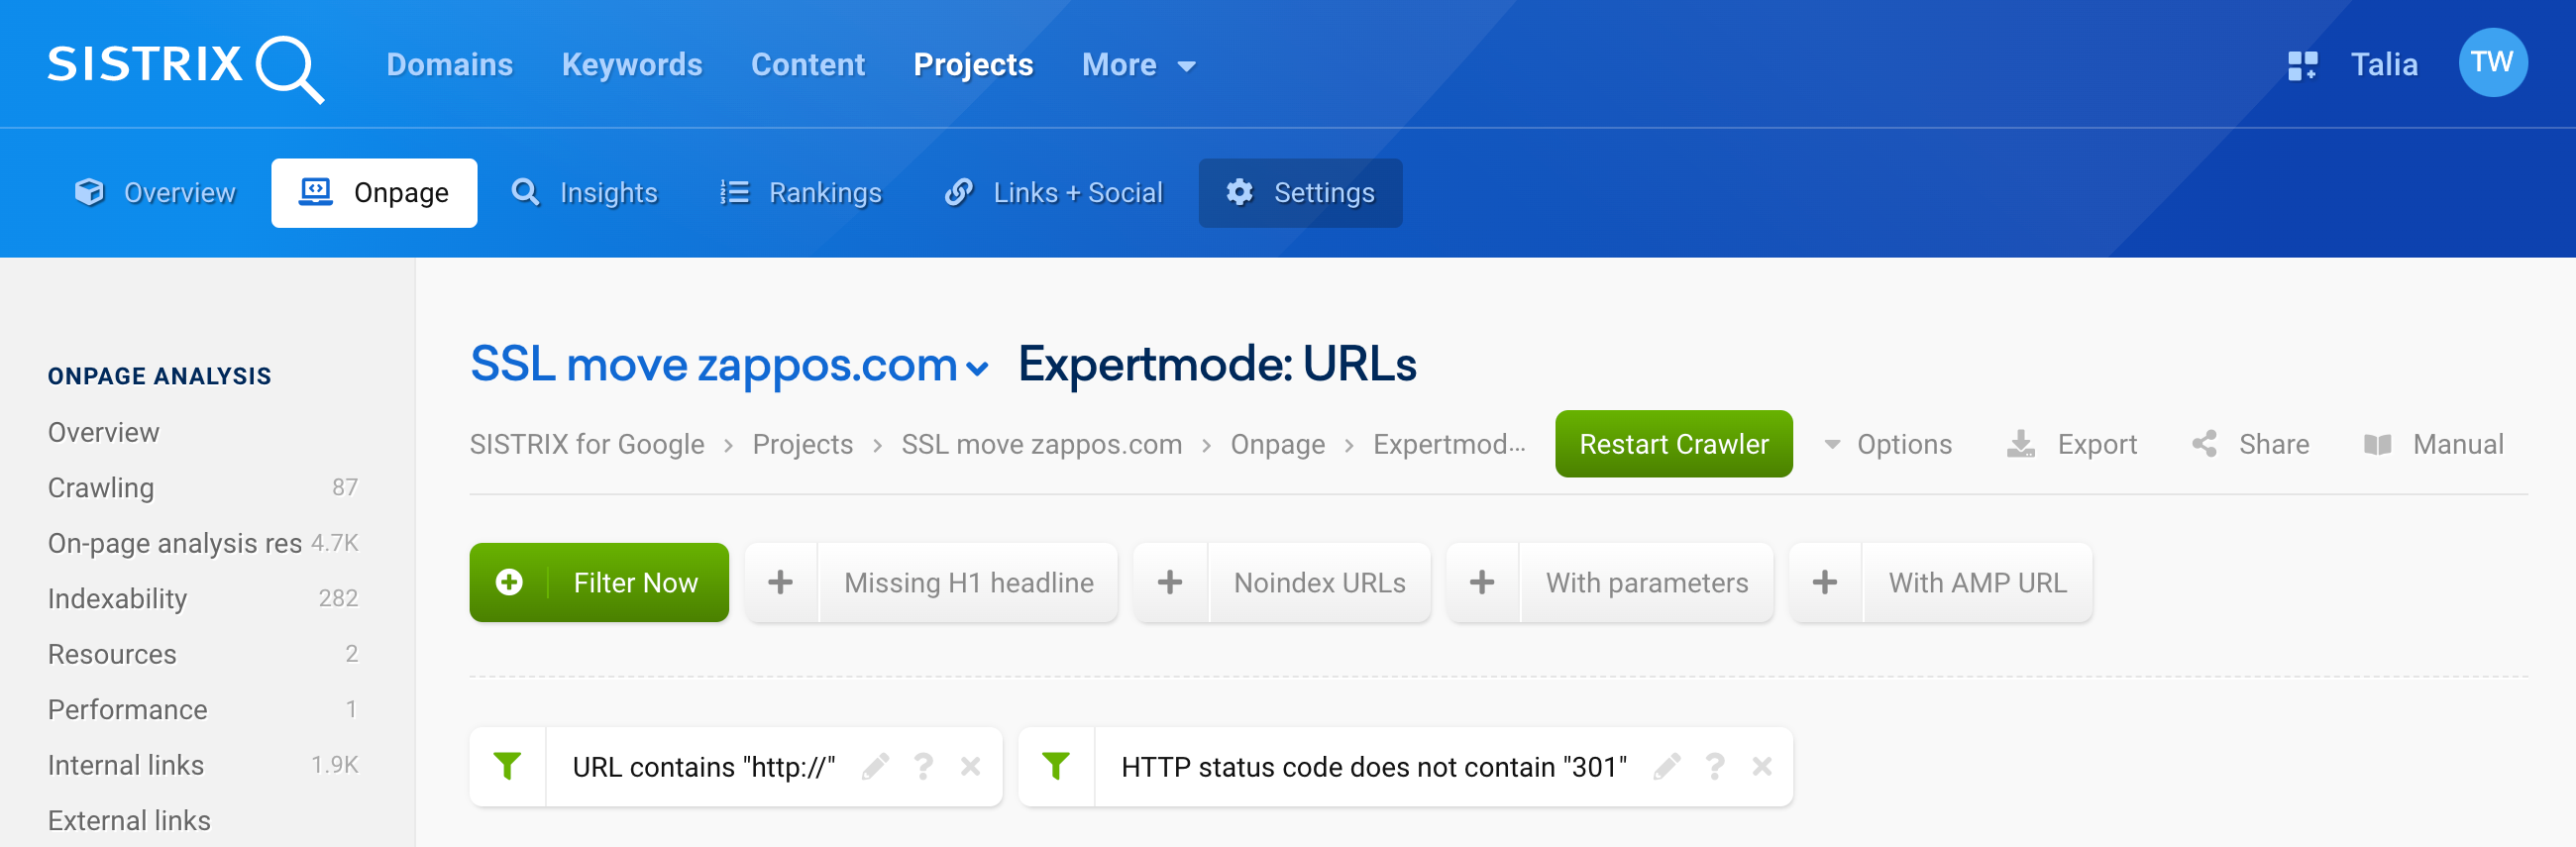 In our project, the item URLs under Expert Mode is selected and the filters - URL contains http:// - and - HTTP status code does not contain 301 - are activated.